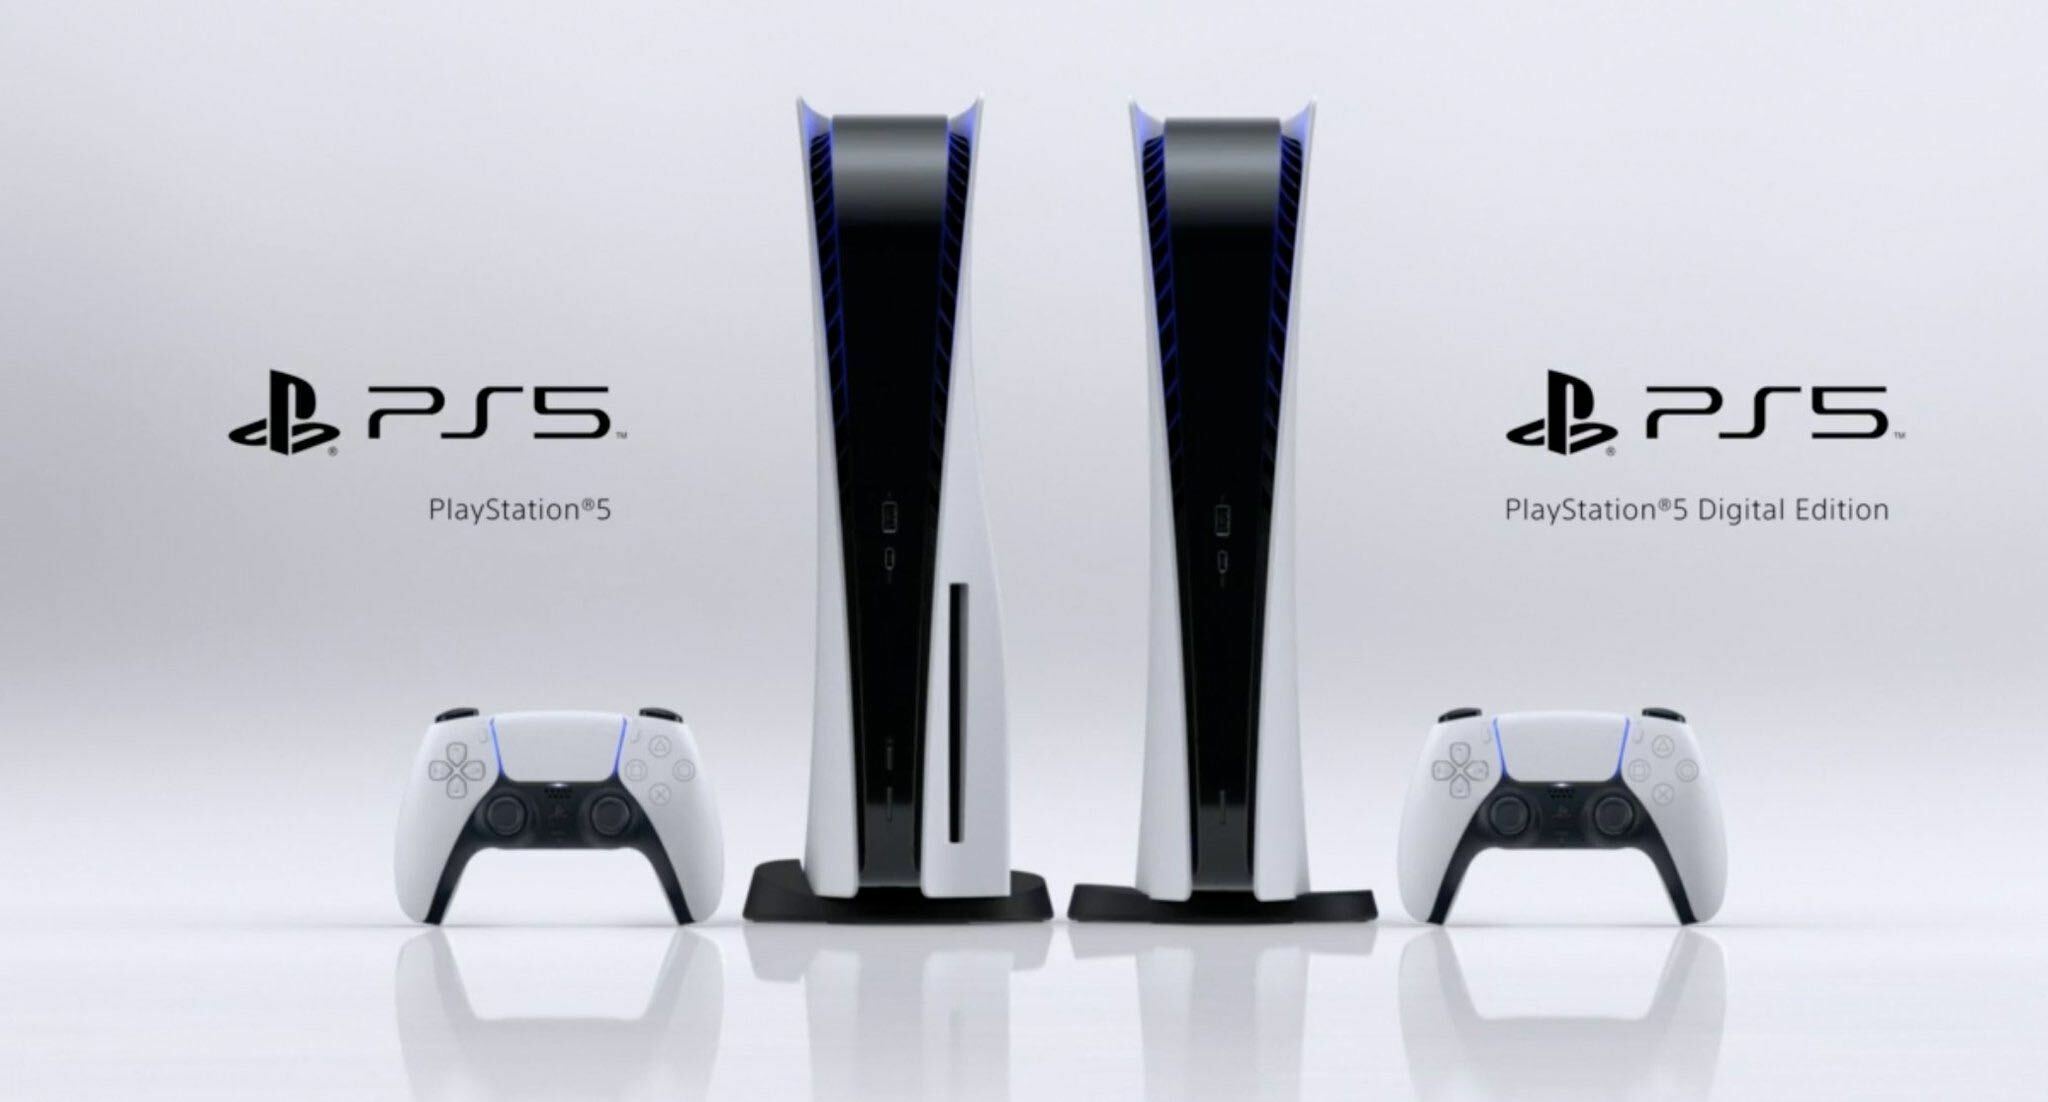 What will the Sony PlayStation 5 look like?